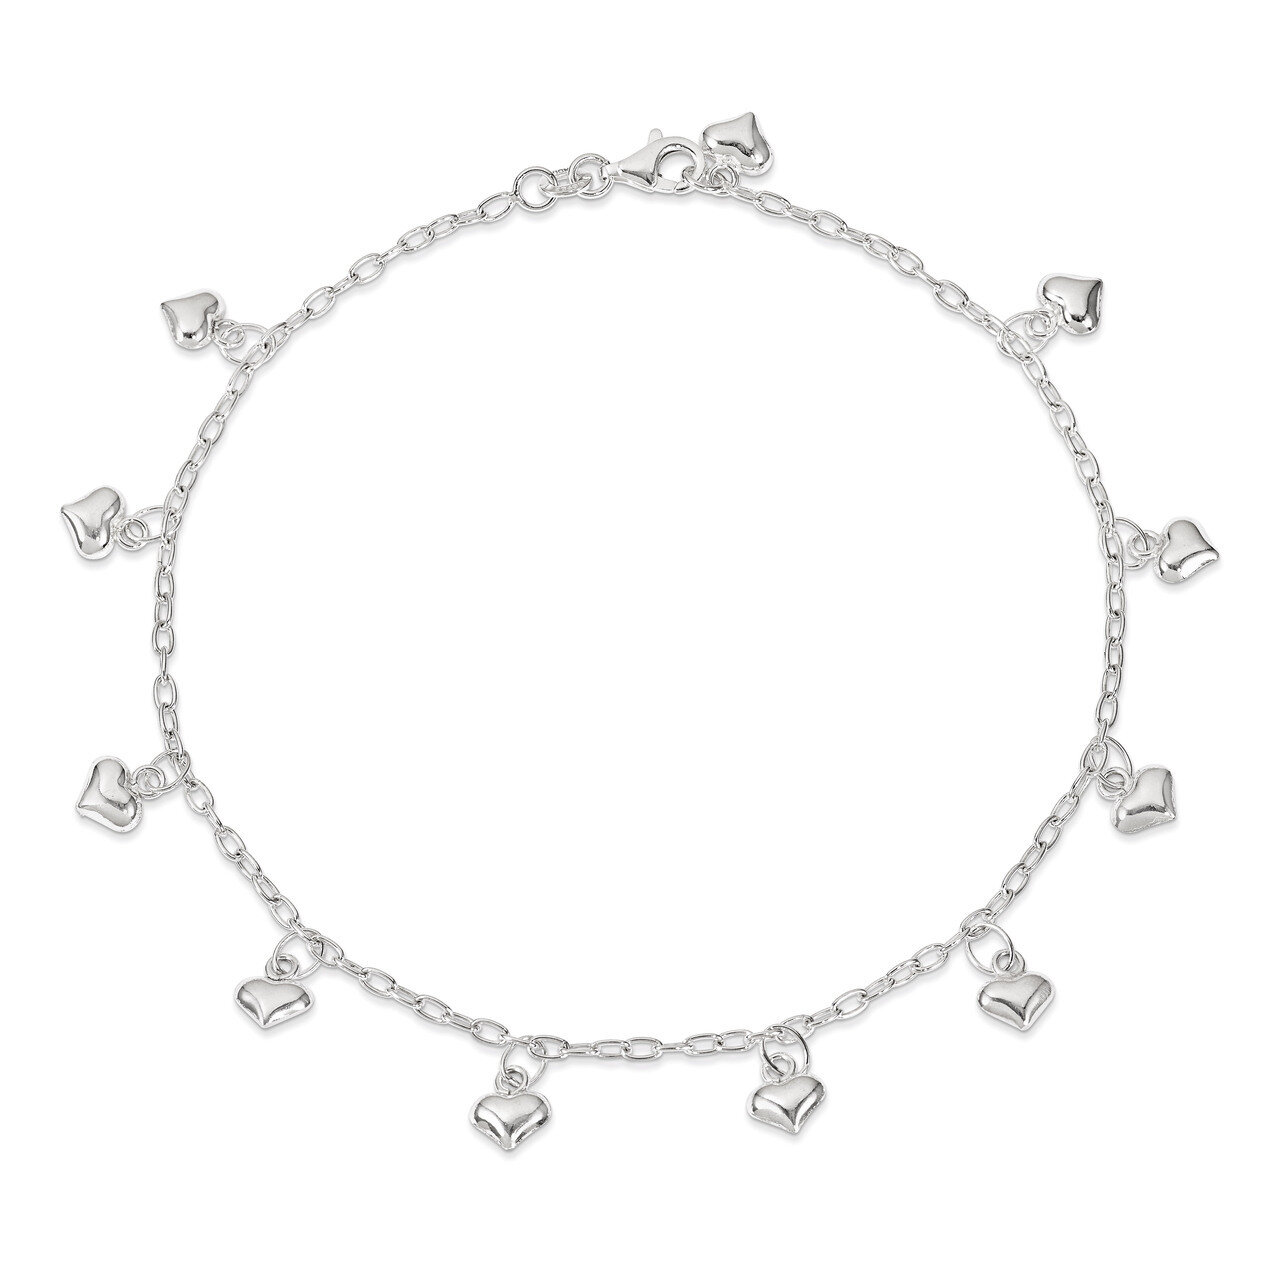 10 Inch Puffed Heart Anklet Sterling Silver Polished QG2792-10